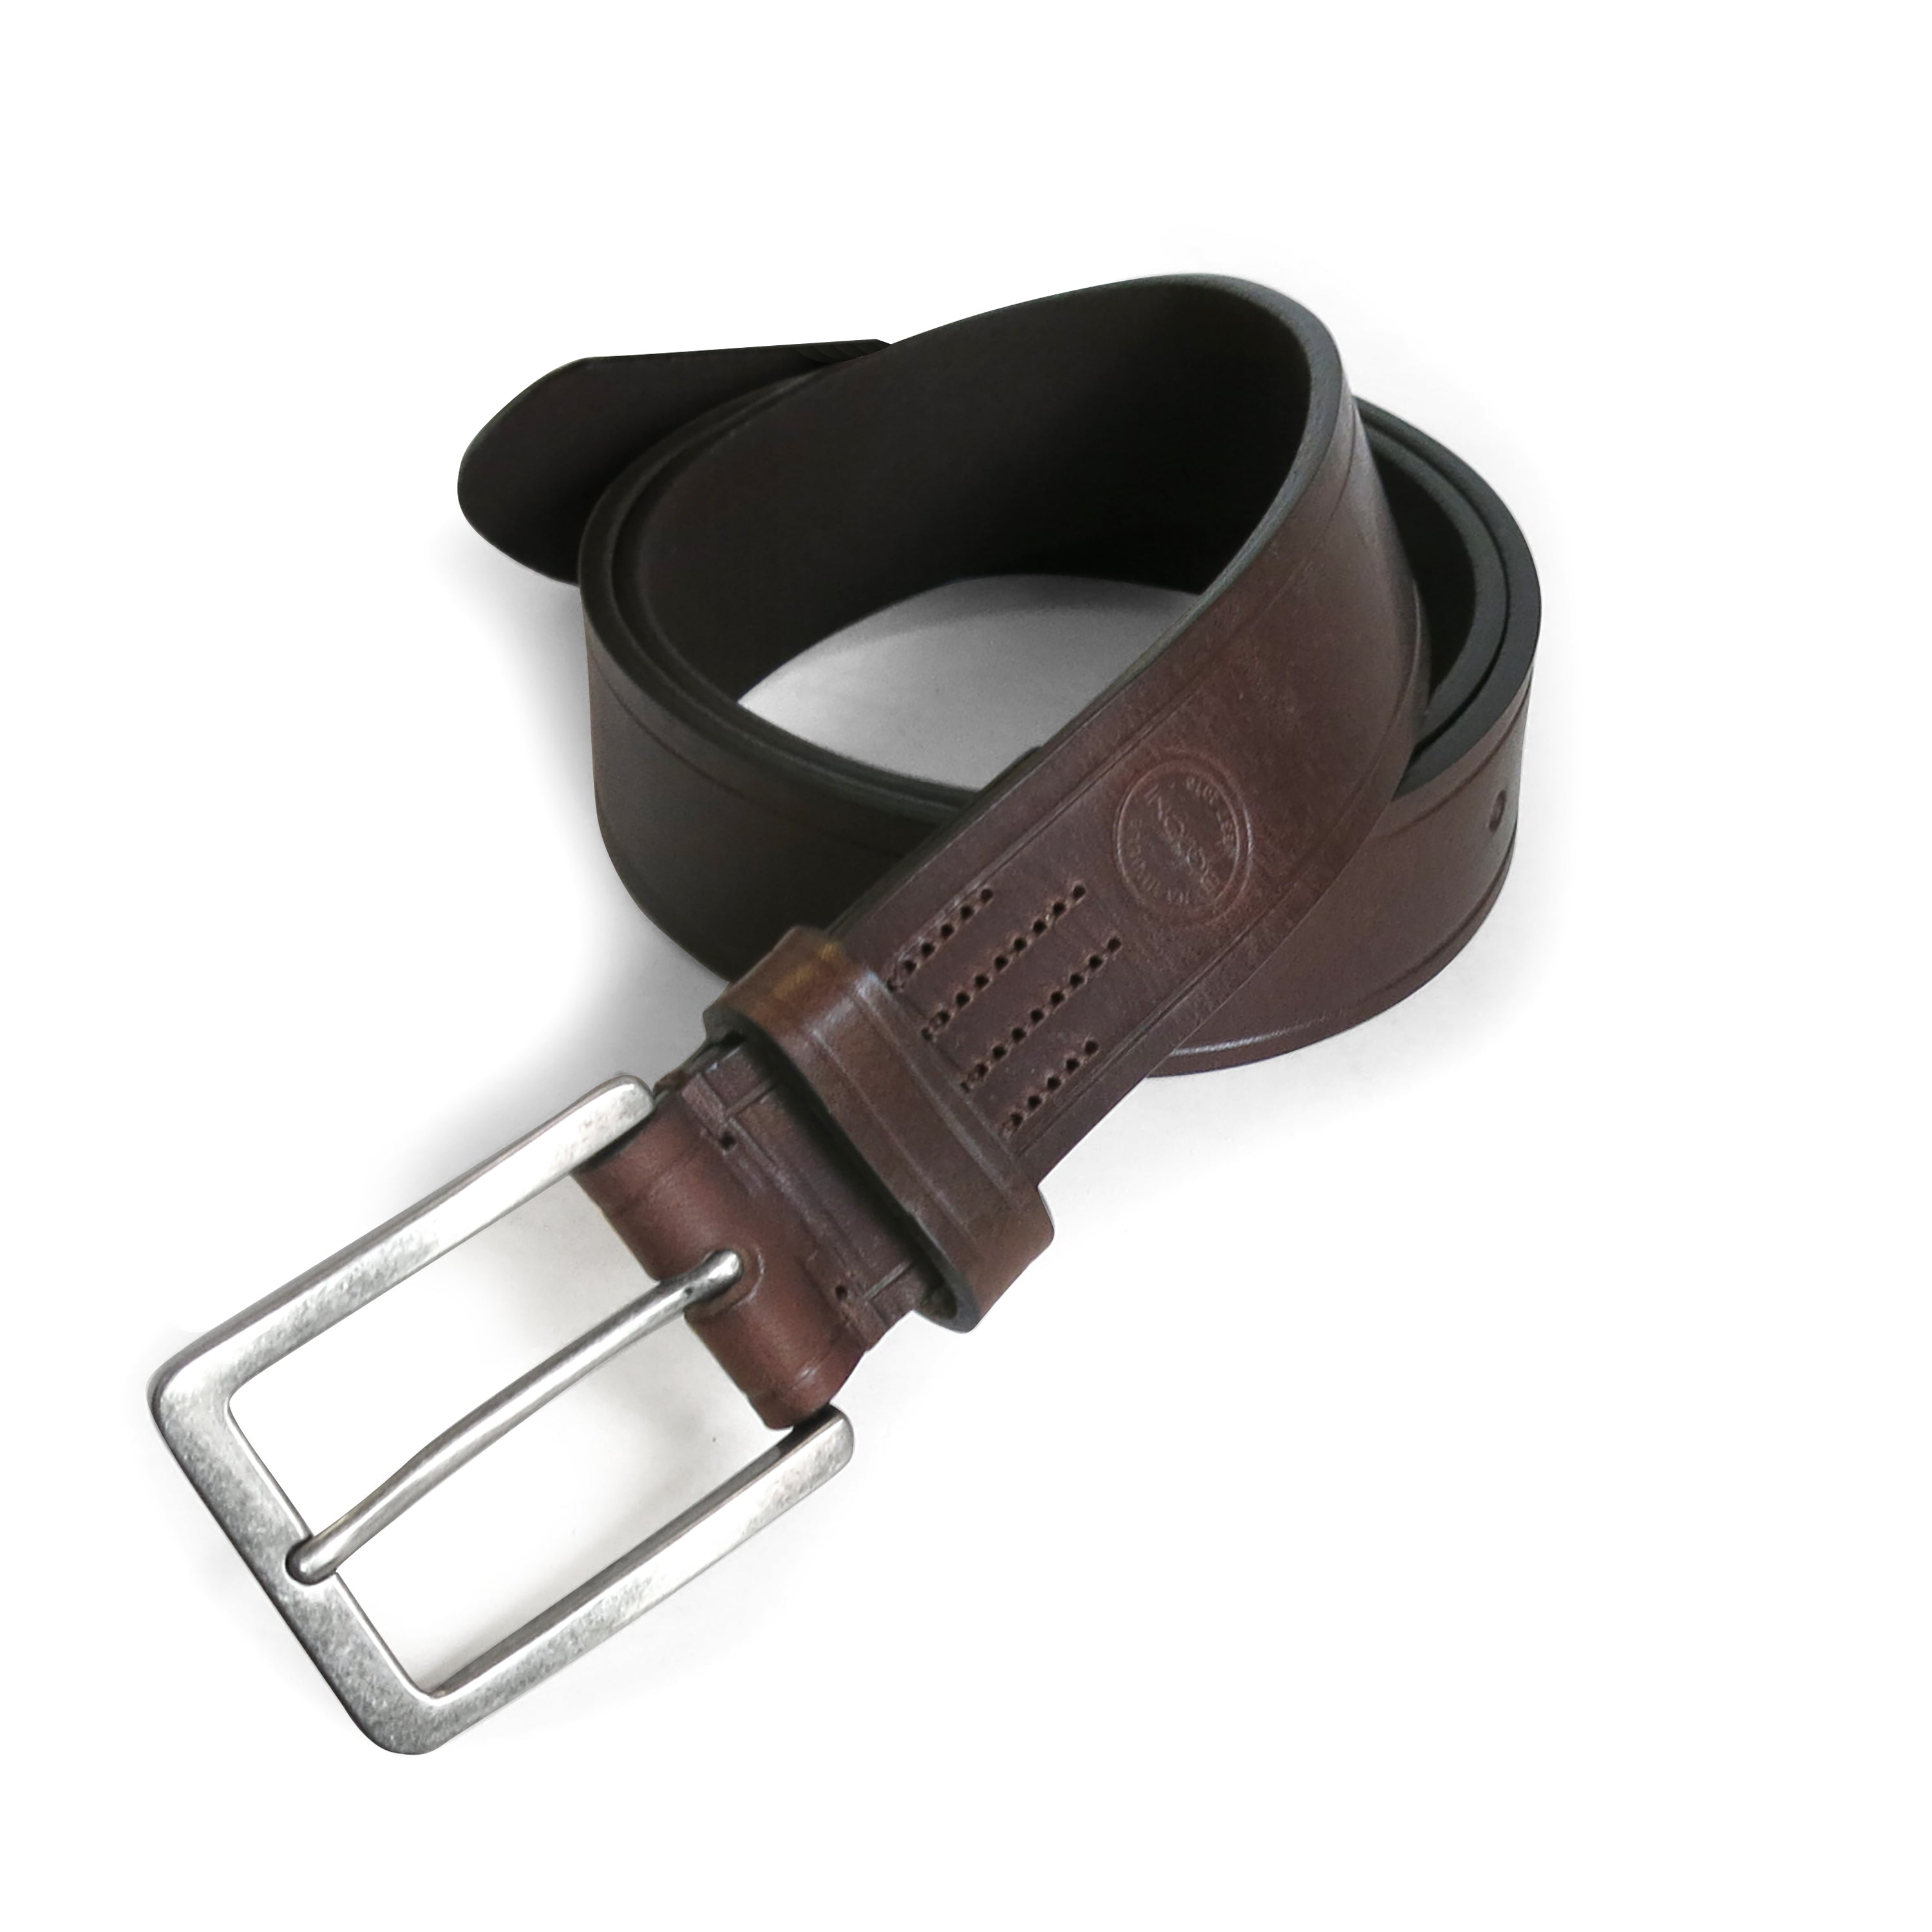 Bono Made in Italy Leather Jean Belt